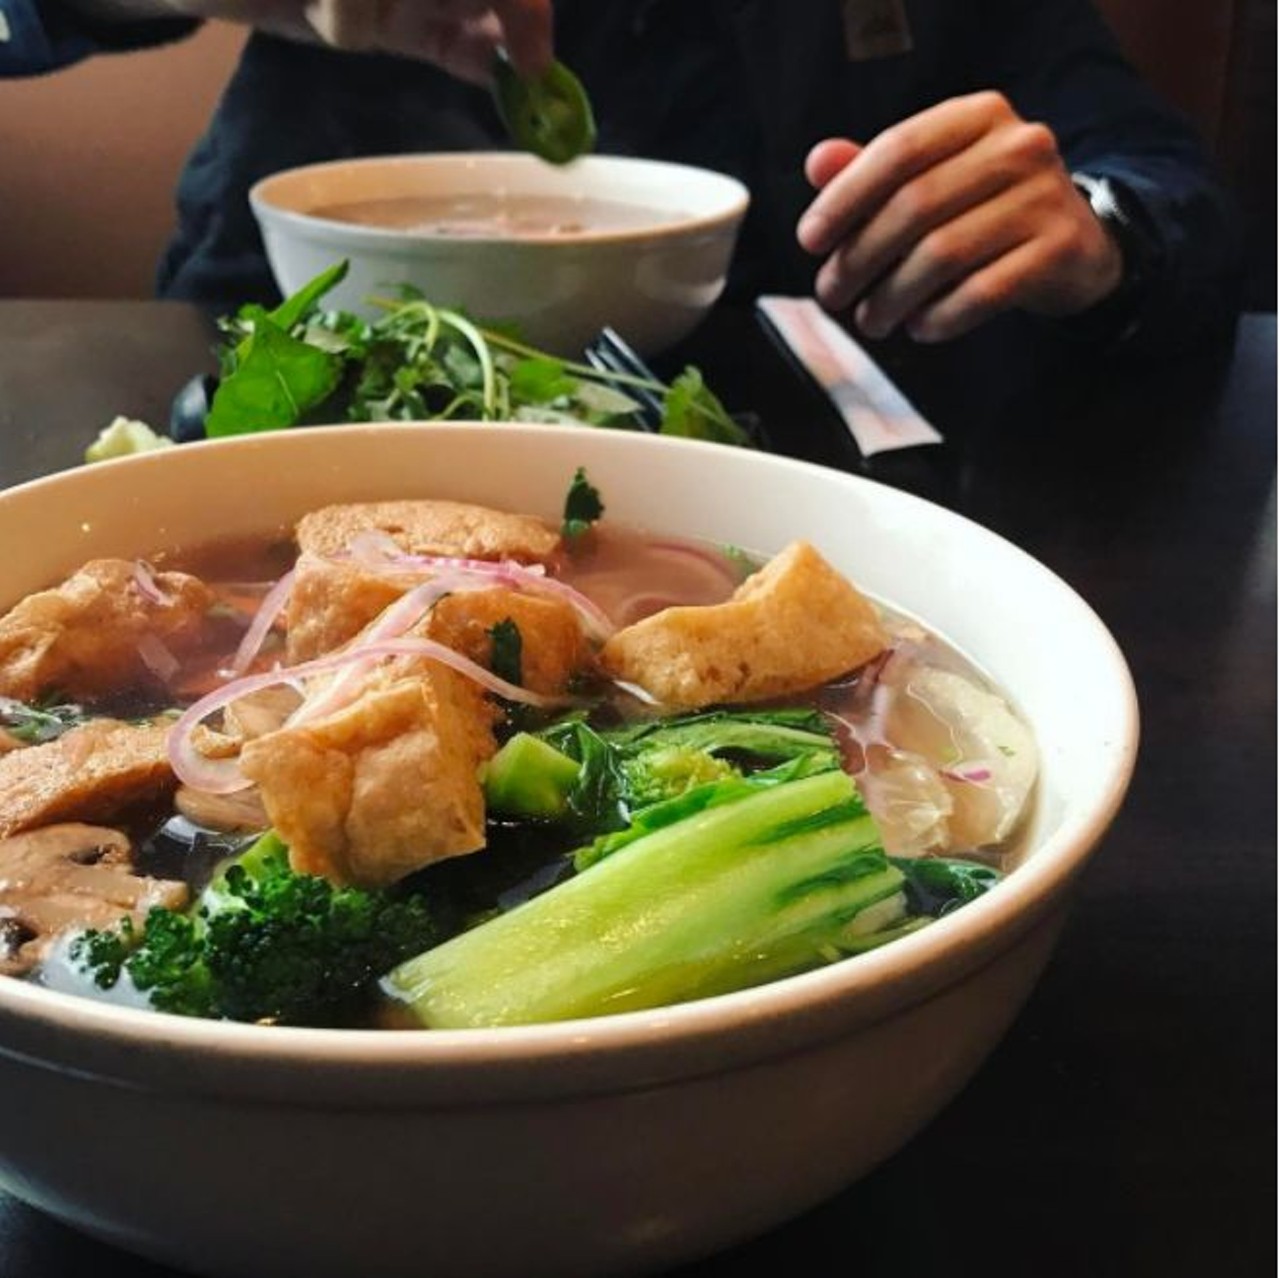 Heavenly Pho
19178 Blanco Road #305, (210) 545-3553
Big appetites should go for the No. 1 with beef noodle soup with eye round steak, brisket, rare flank, tendon, tripe and meatball. 
Photo via Instagram,  annais_fm